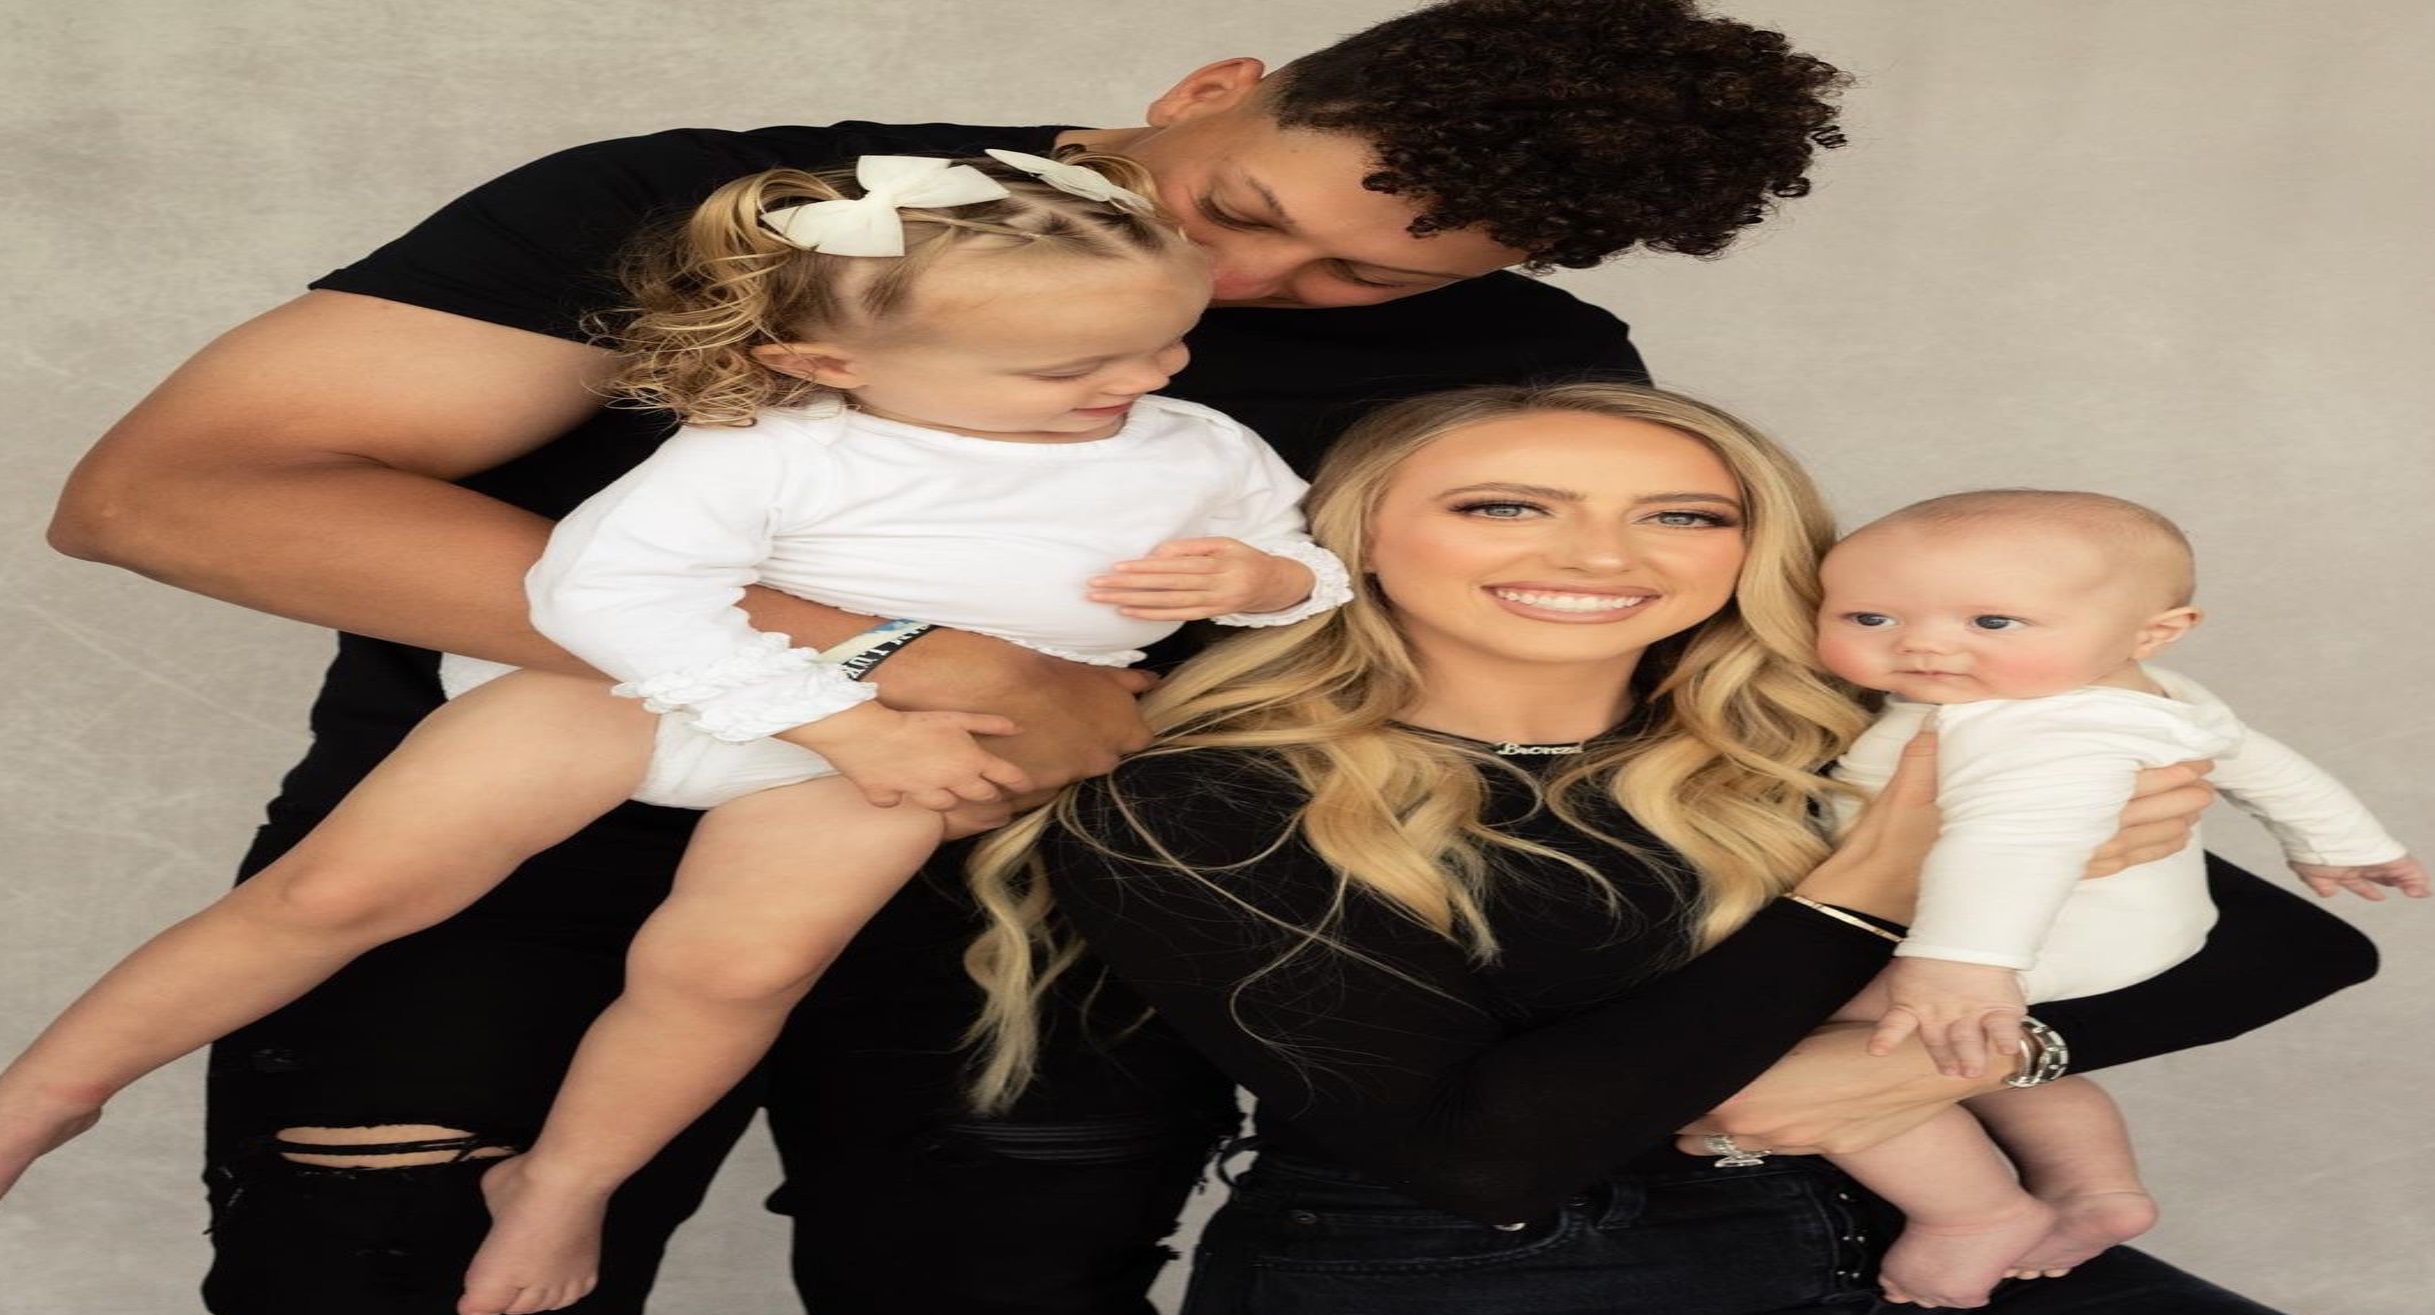 atrick Mahomes and Brittany, have shattered dreams with their announcement of separation, leaving behind a trail of tears despite the tender bond of parenthood they shared with their two beloved children